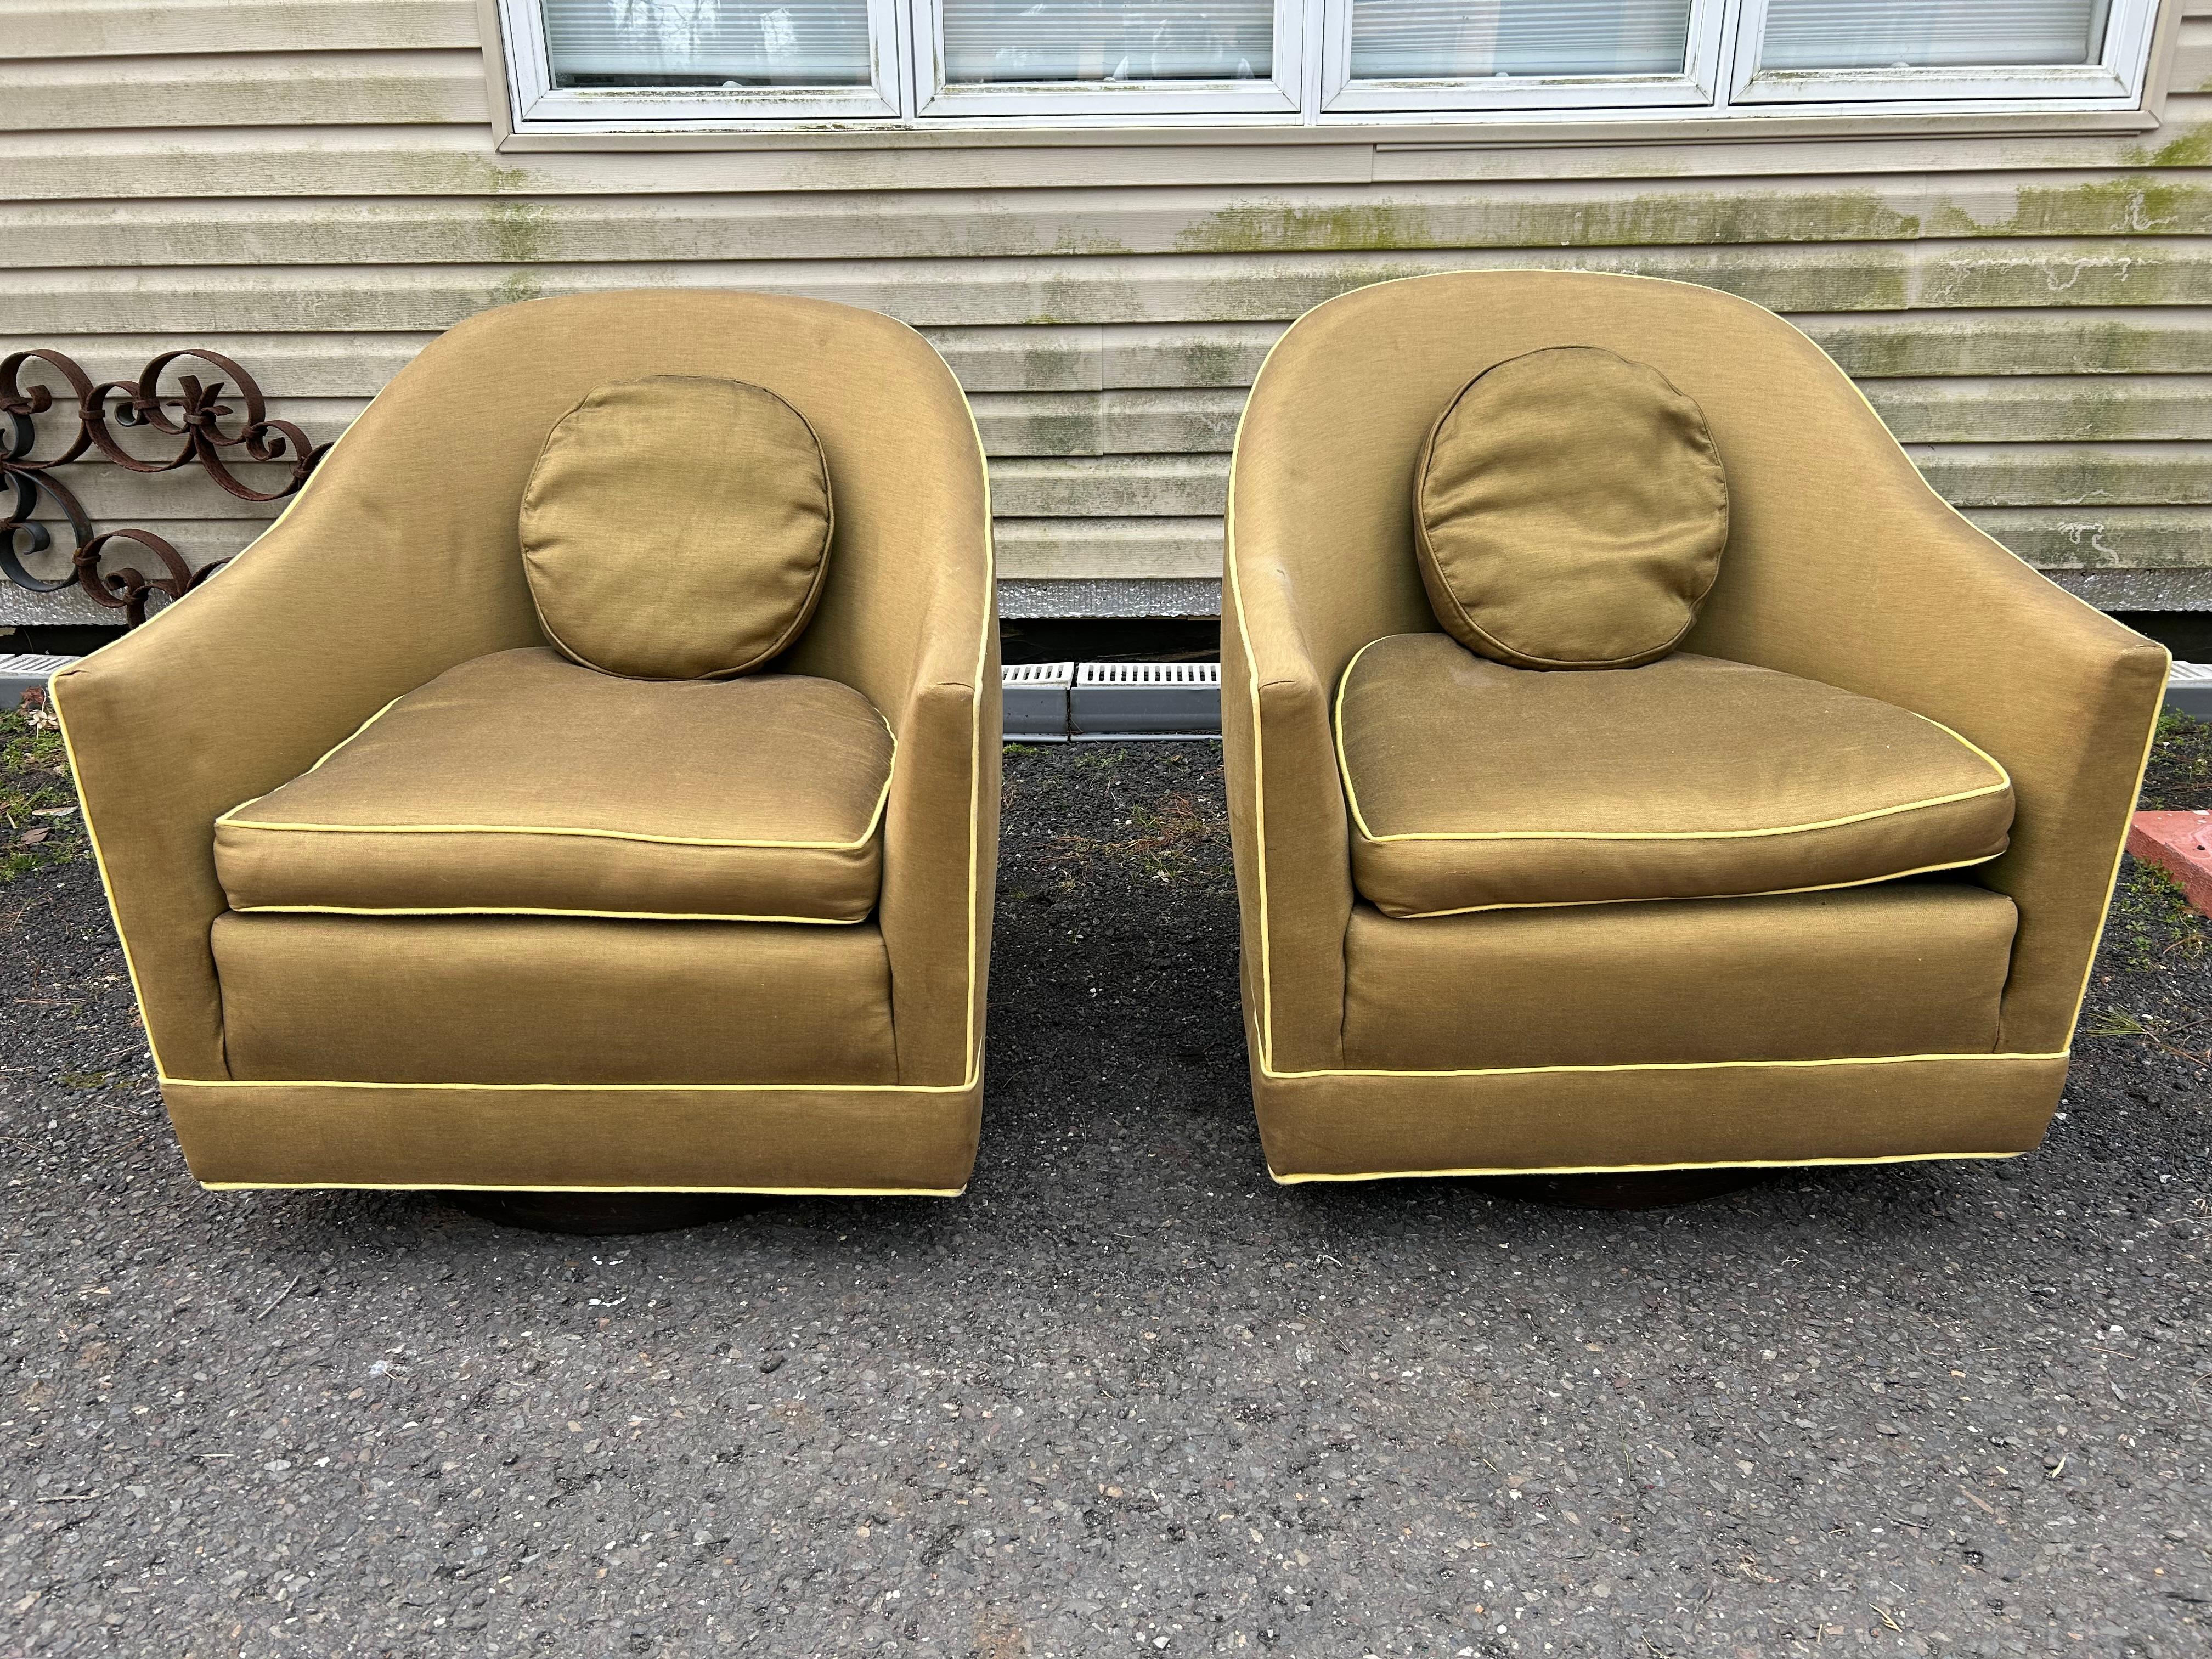 Marvelous pair of Harvey Probber barrel back club chairs on wooden swivel platform bases.  We love the original small round back cushion.  Chairs looks to have been reupholstered in the past but needs to be refreshed.  These measure 31